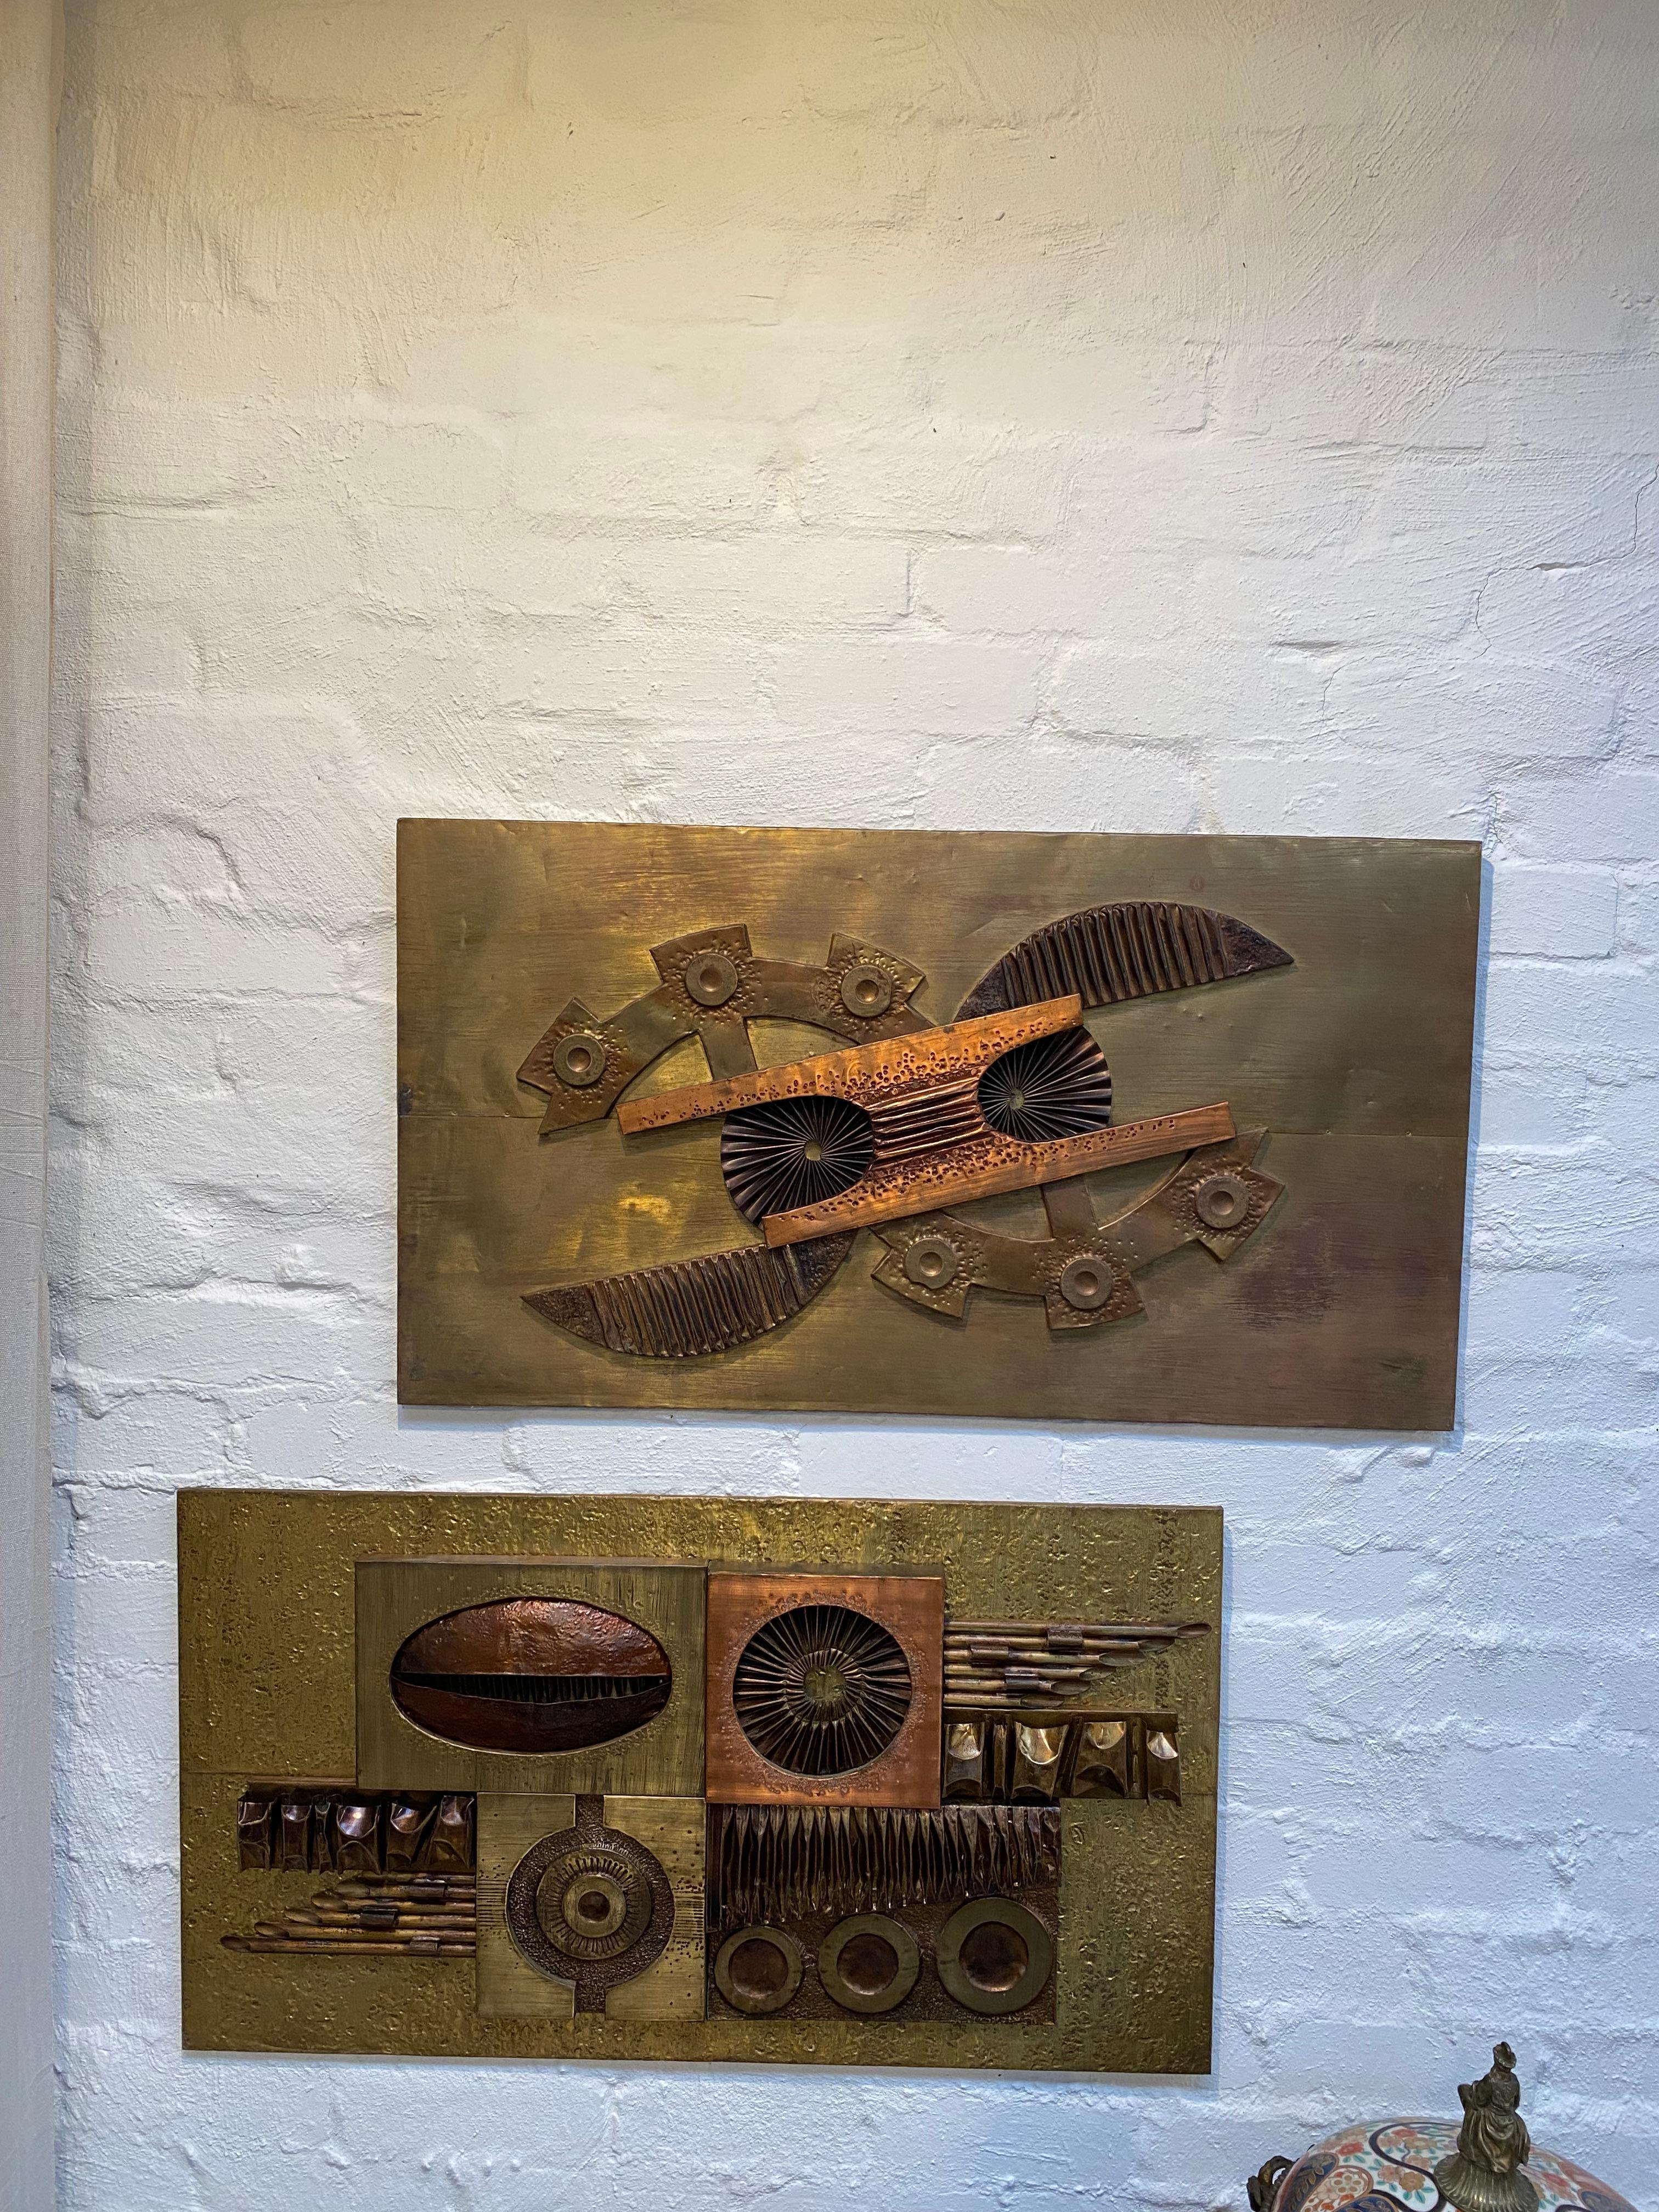 A rare set of decorative wall sculptures dating to the 1970s, by artist and maker Stephen Chun.

Chun studied at art school in Taipei, graduating in the late 1960s. He was keenly interested in metalwork. He moved back to his native Hong Kong and